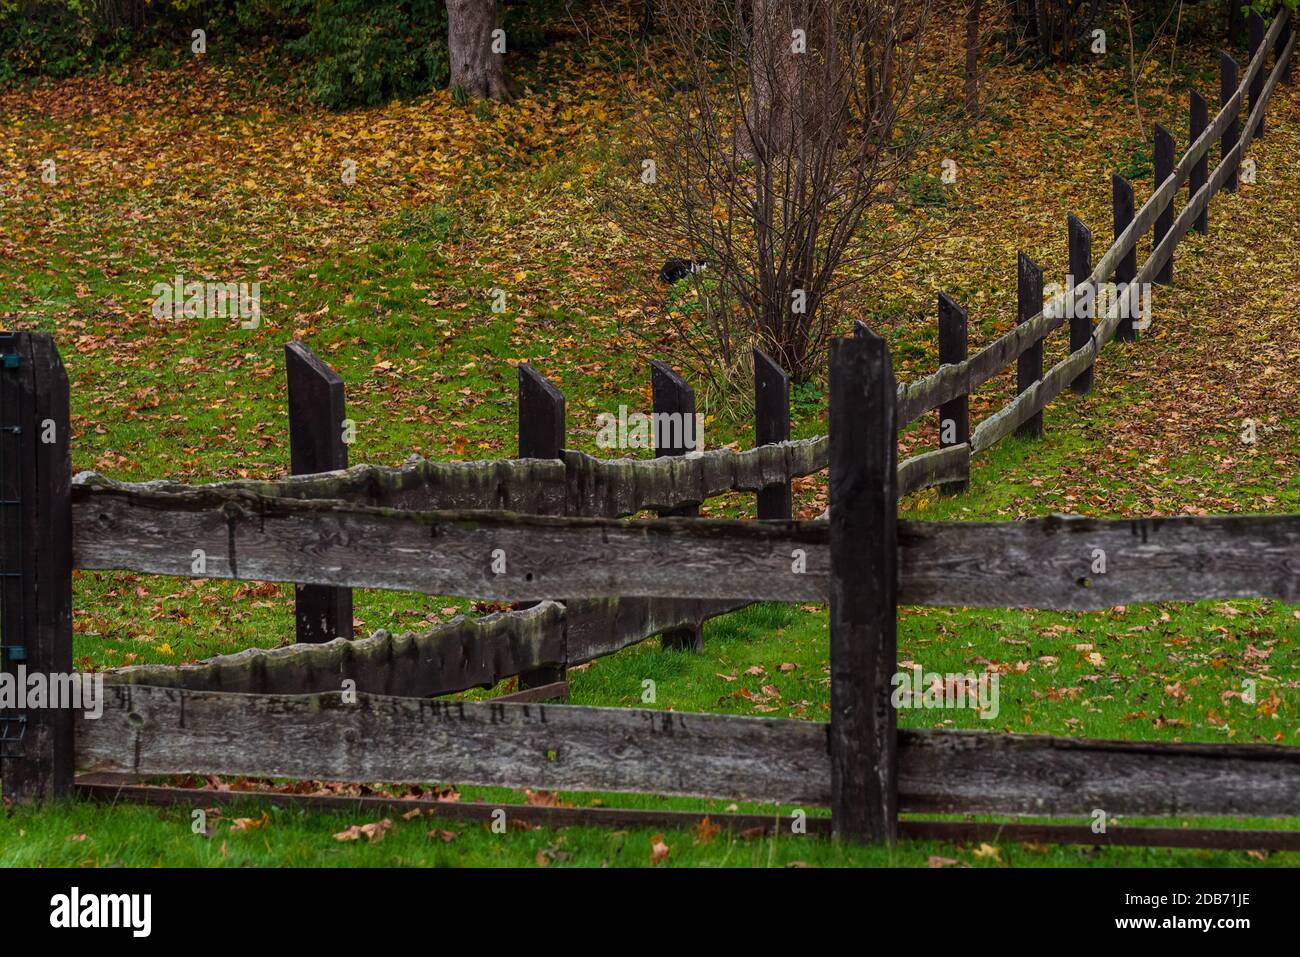 dark horizontal wooden fence with wide boards and a green lawn on which leaves from nearby tree branches have fallen Stock Photo